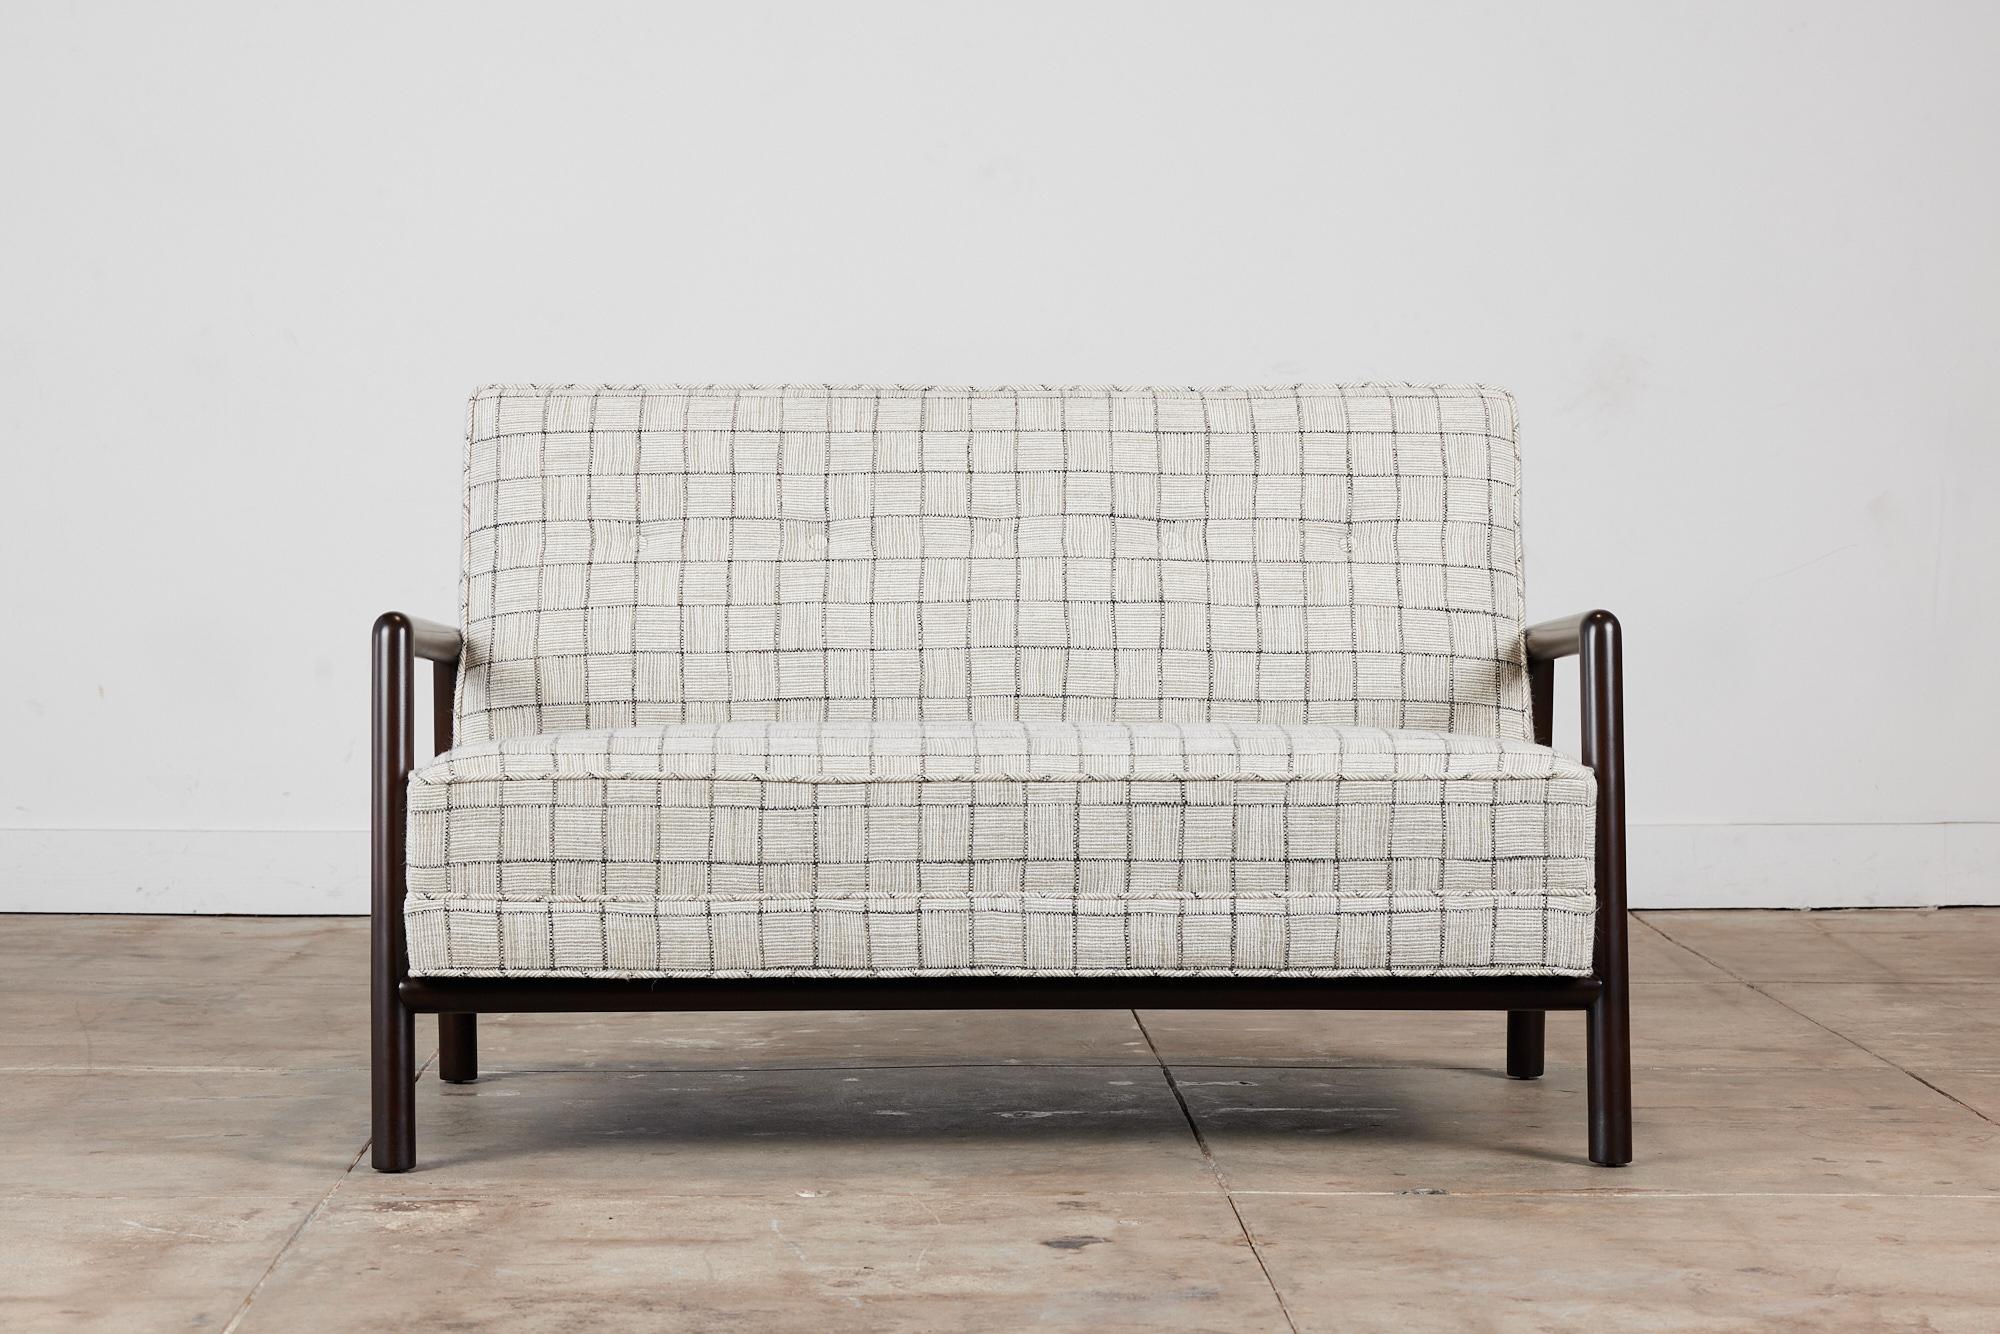 Loveseat by T.H Robsjohn Gibbings, for Widdicomb c.1950s USA. This sofa features rounded stained beech wood frame with armrests. The cushions have been newly reupholstered in a gray window pane wool blend fabric with a tufted back